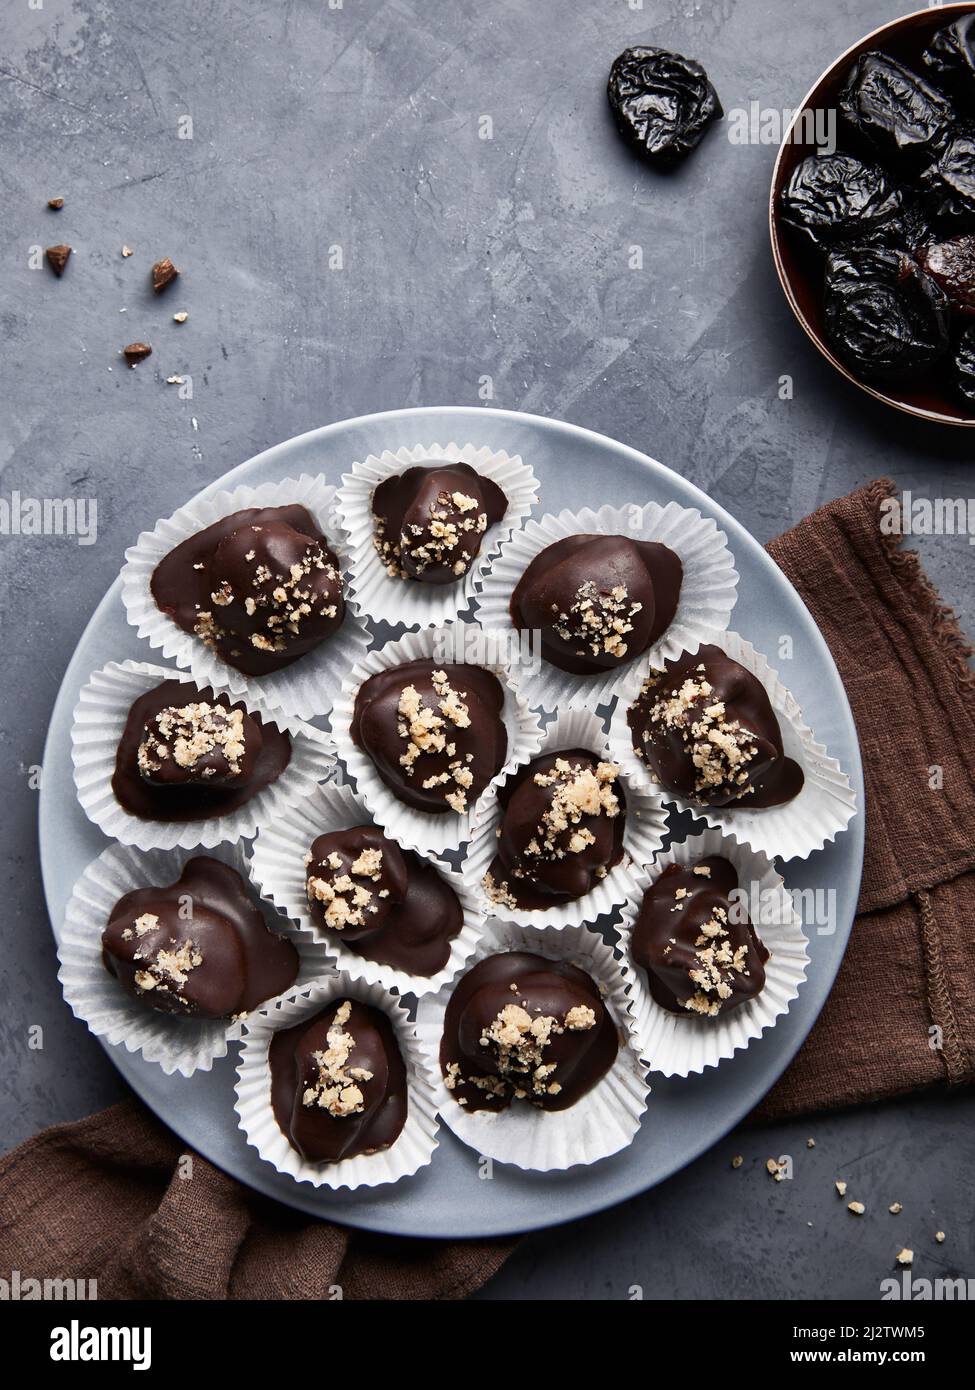 Healthy Sugar free Homemade Raw vegan chocolate candies with dried plums and nuts on blue background flat lay Stock Photo